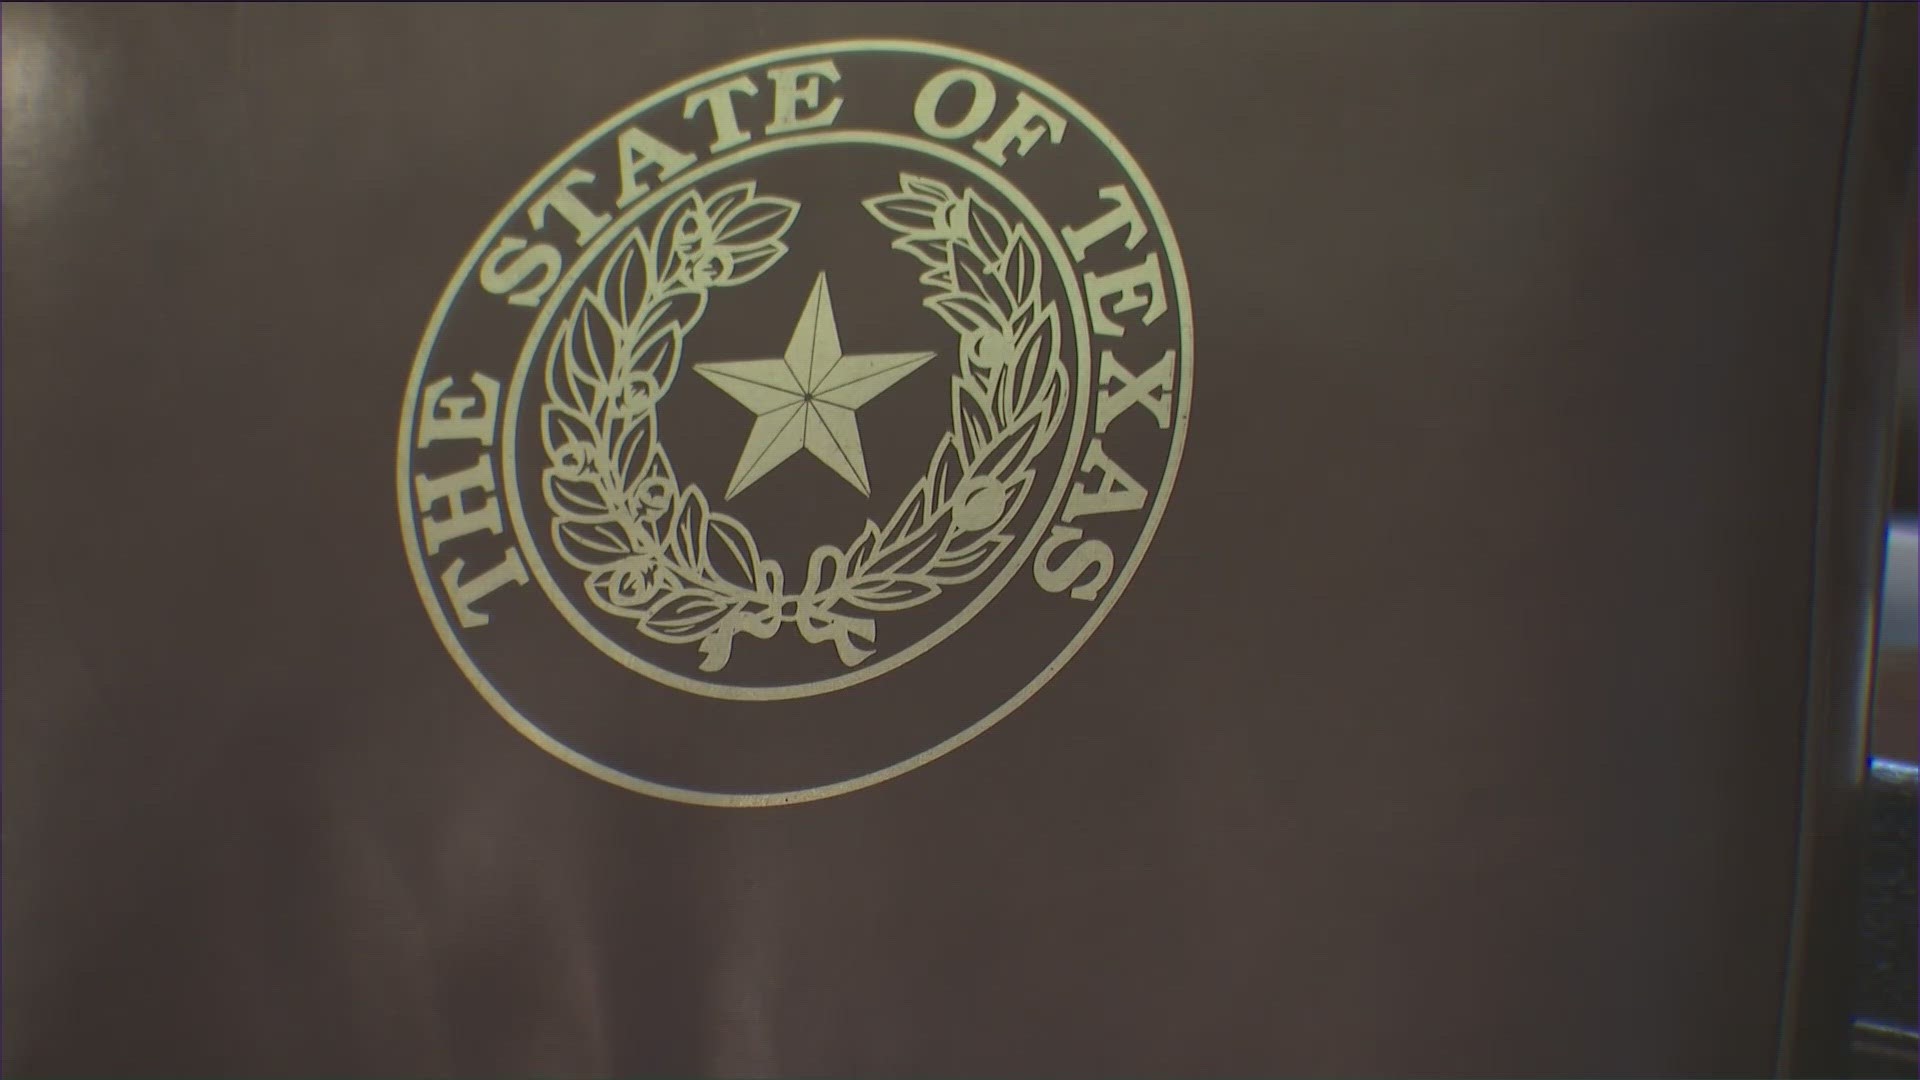 Texas state representatives are working to hammer out a $302.6 billion proposal for how the state will spend taxpayer dollars over the next two years.